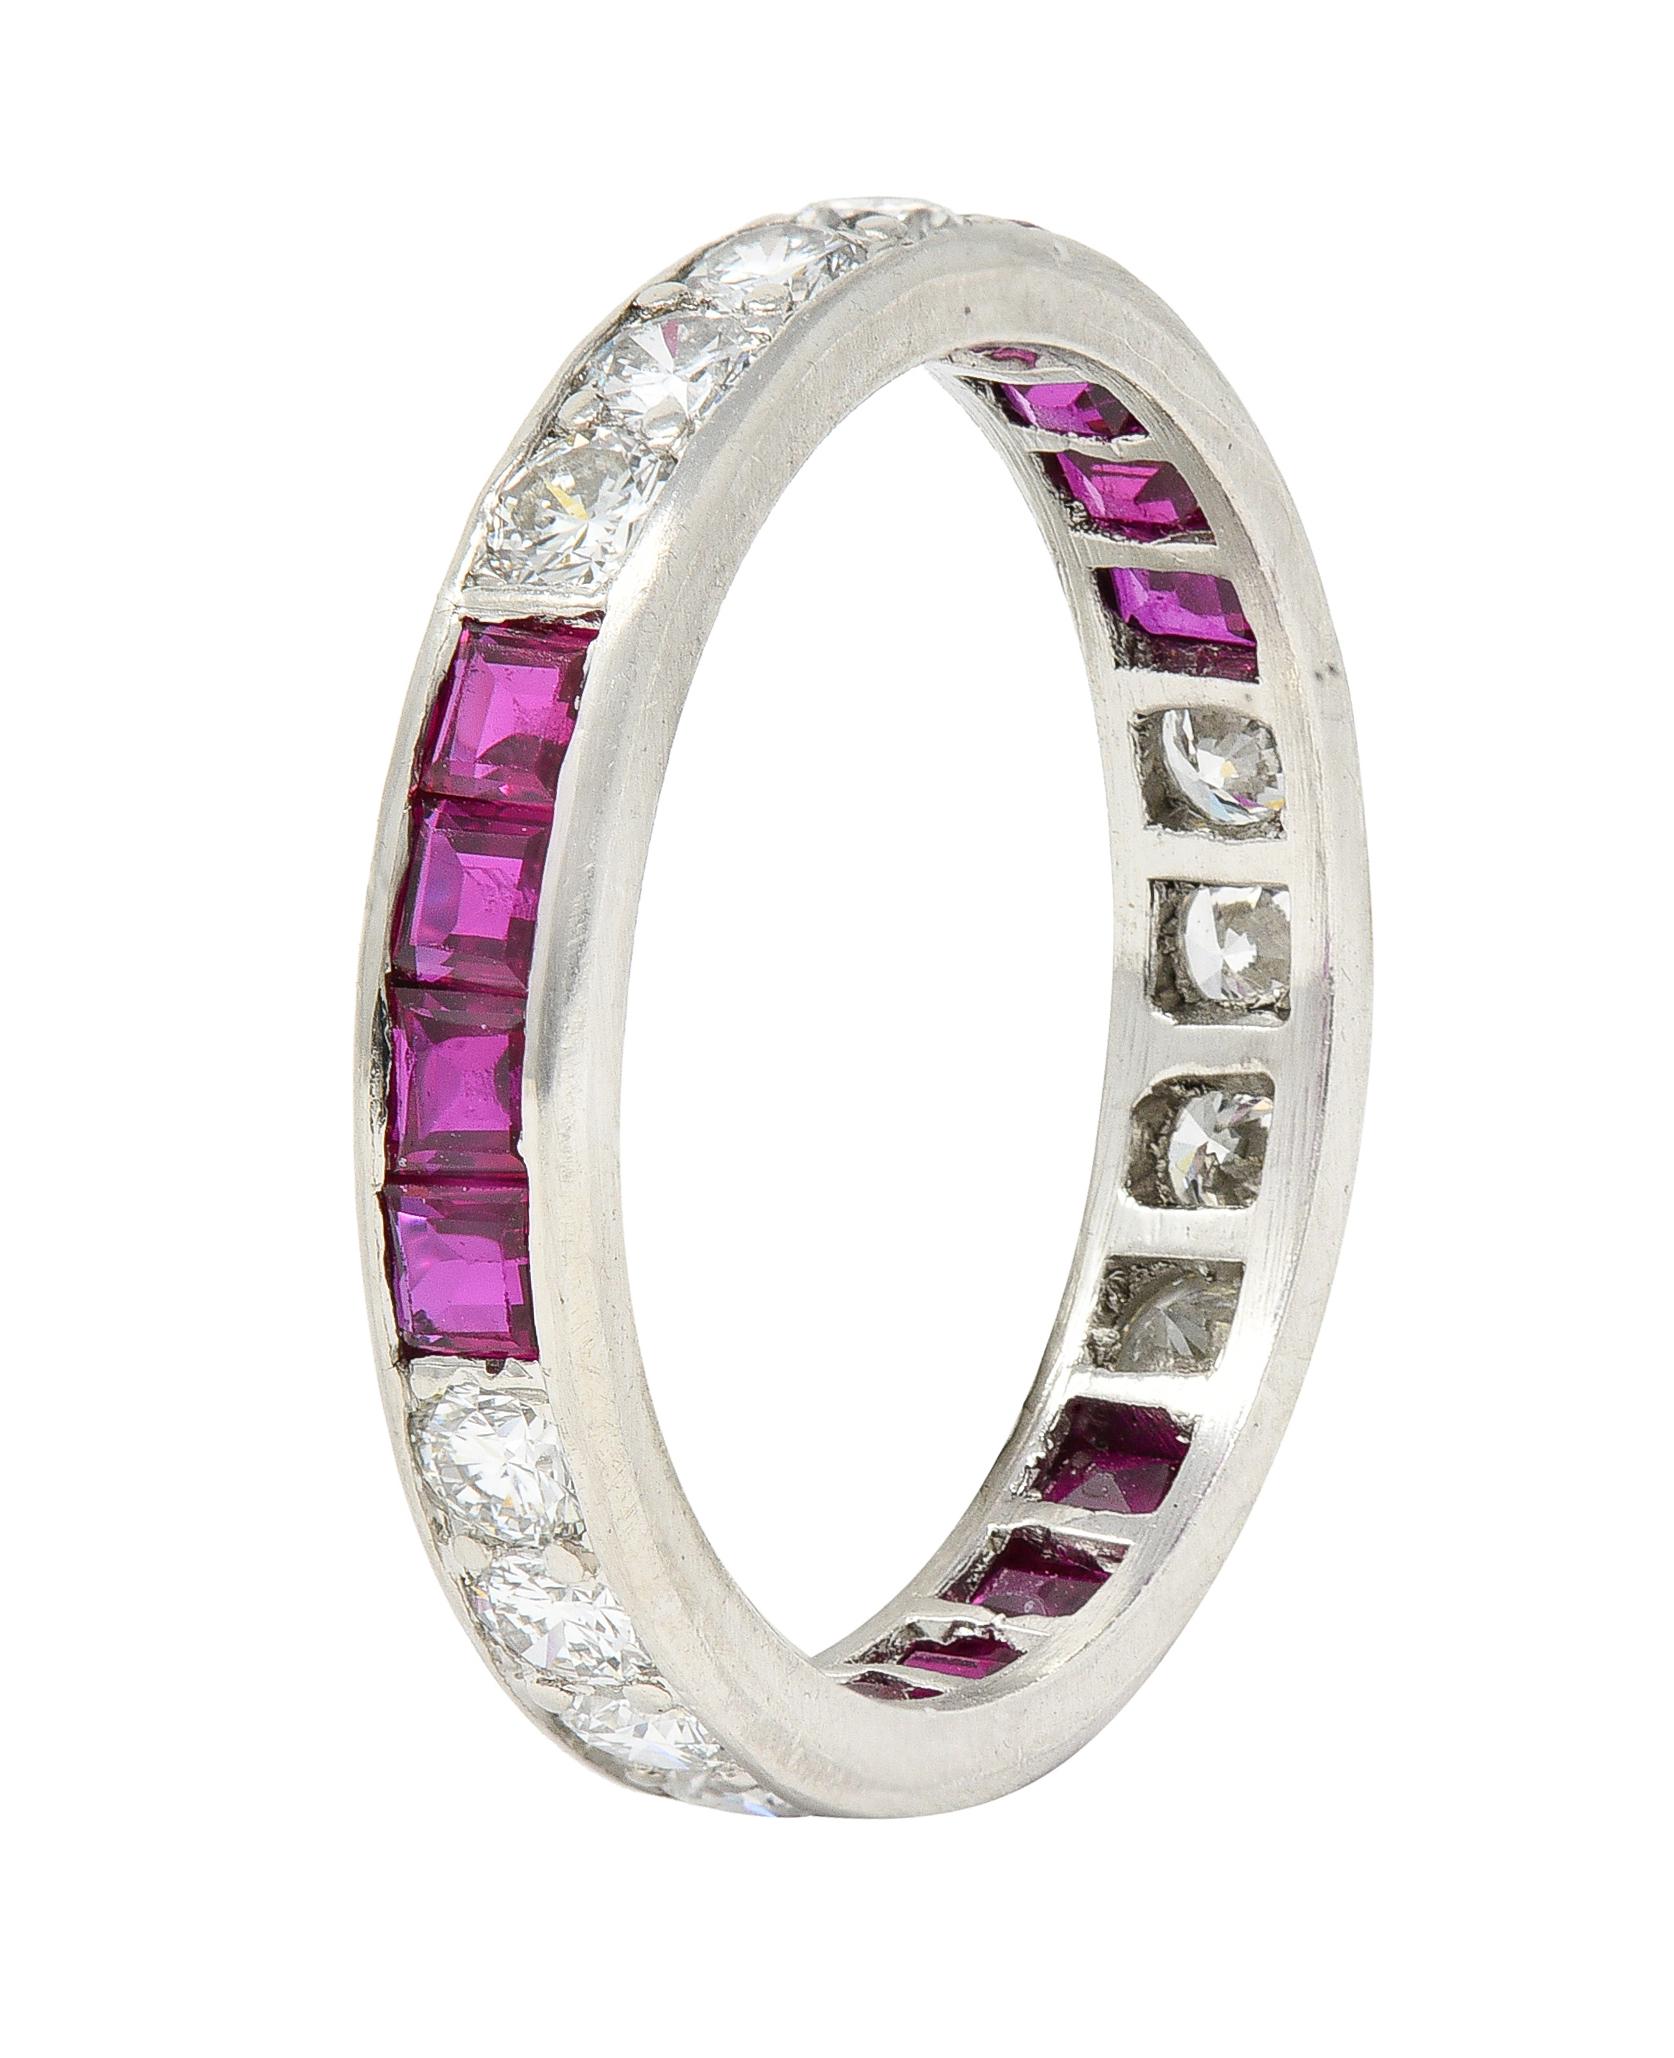 Eternity band ring features round brilliant diamonds alternating with square cut rubies
Diamonds are bead set while weighing in total approximately 0.72 carat - G to I color with SI clarity
Rubies are channel set while weighing in total